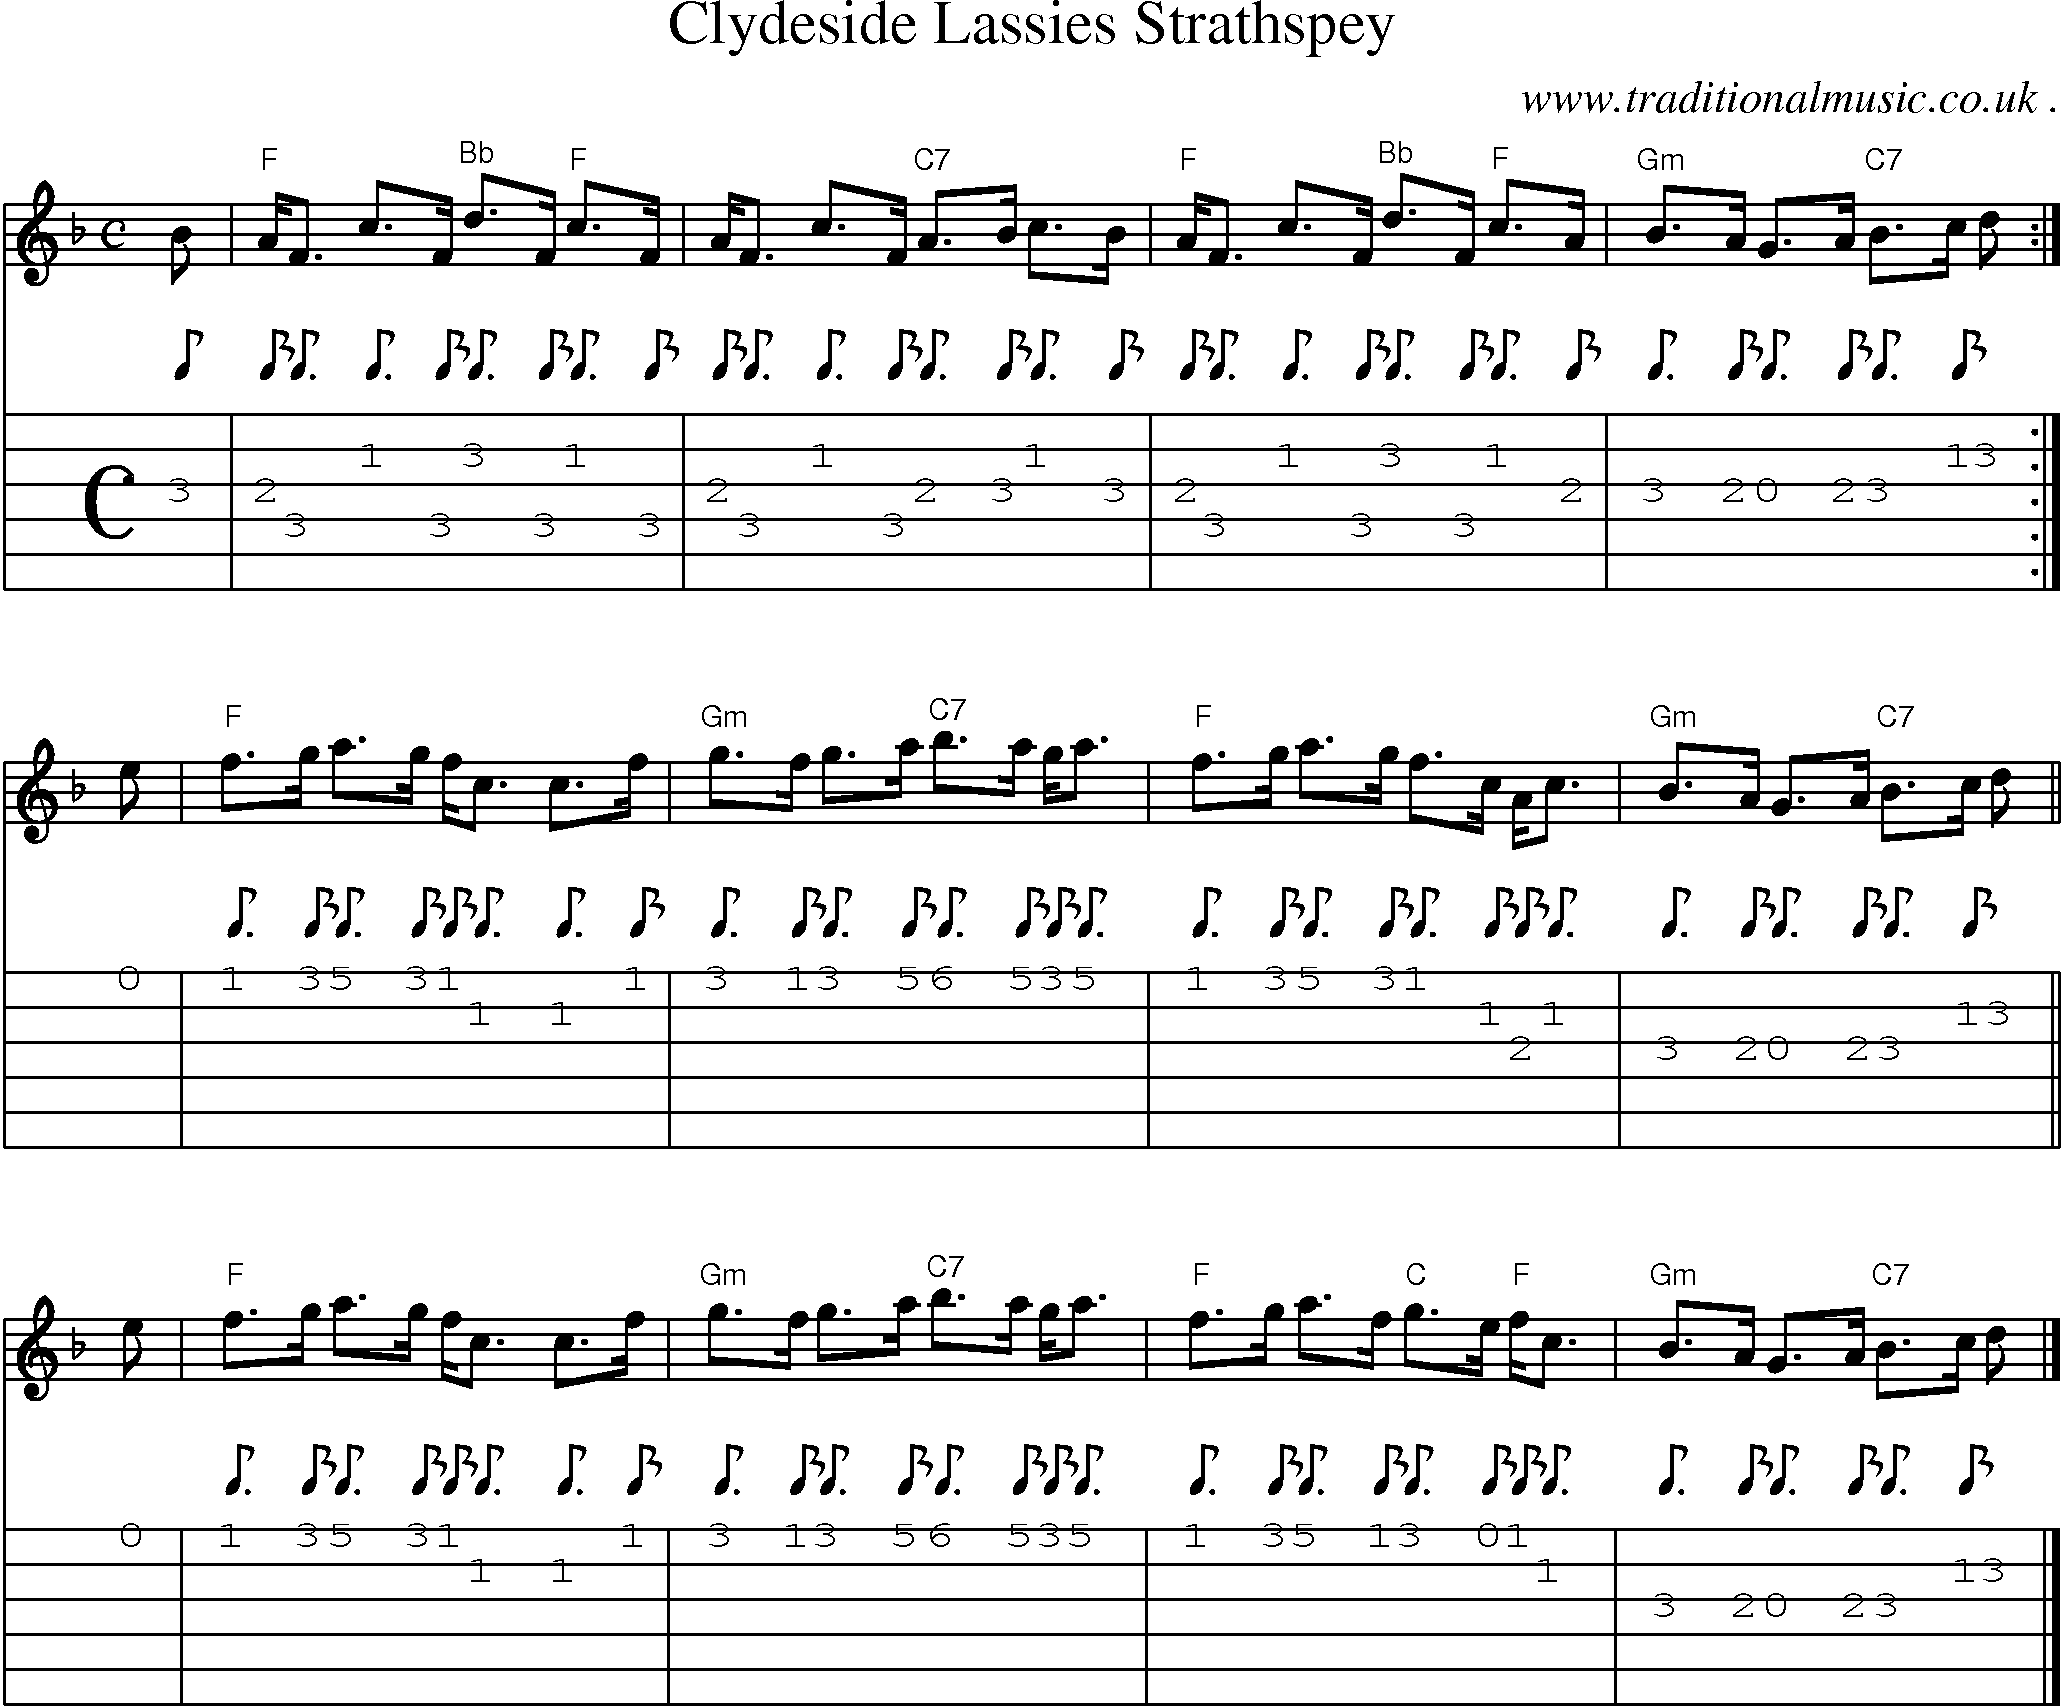 Sheet-music  score, Chords and Guitar Tabs for Clydeside Lassies Strathspey